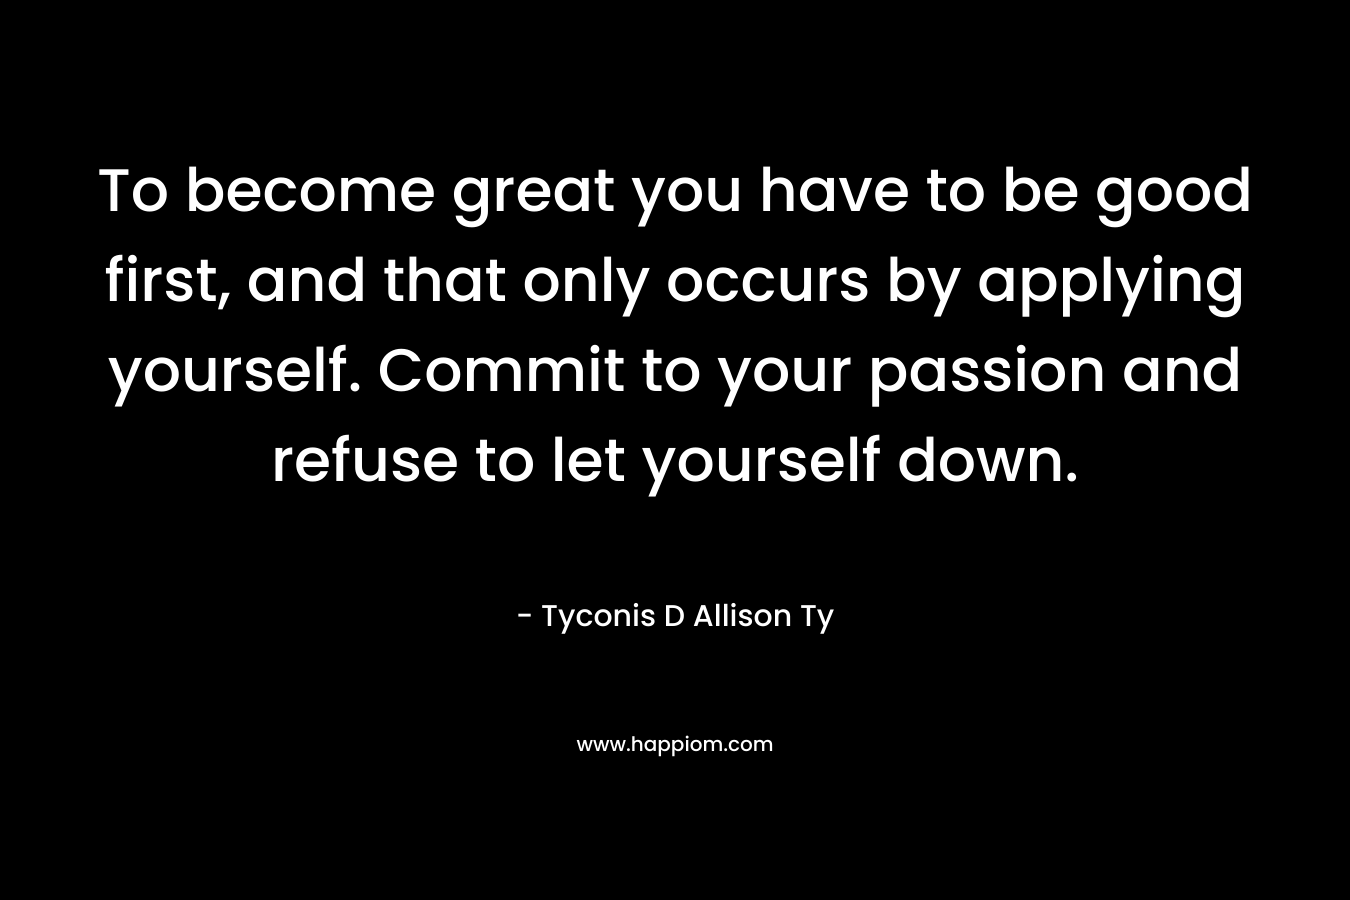 To become great you have to be good first, and that only occurs by applying yourself. Commit to your passion and refuse to let yourself down.